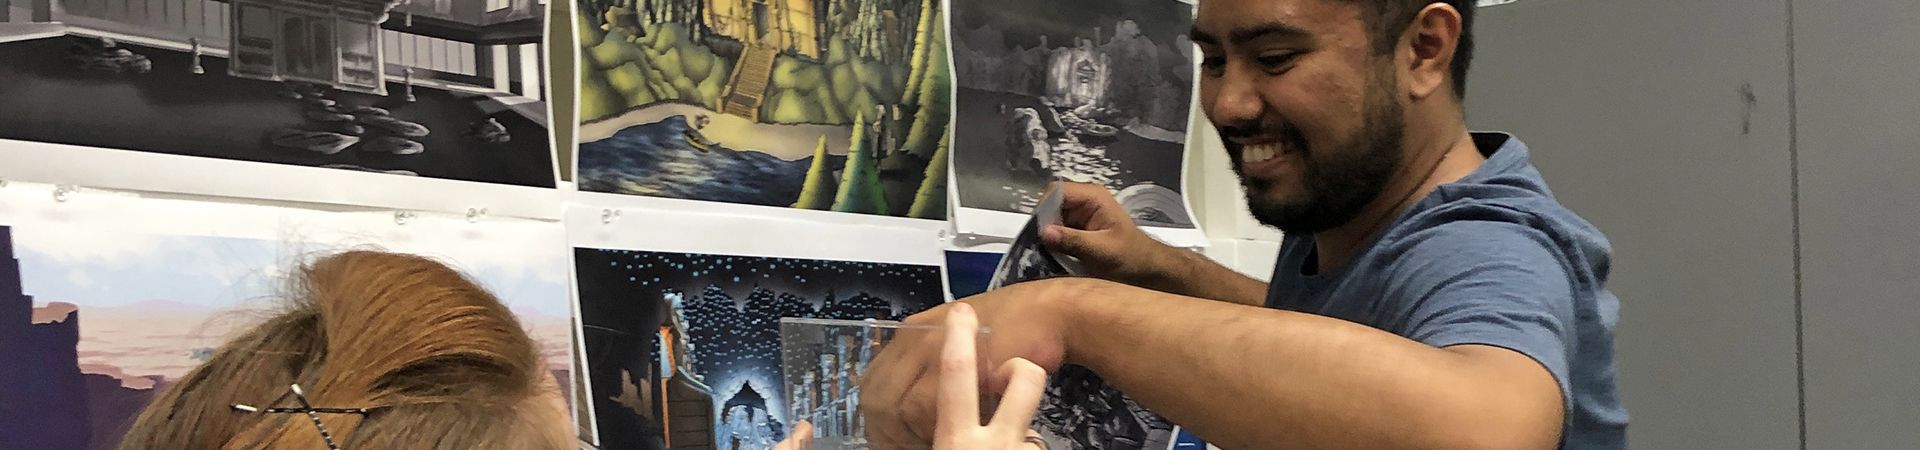 2 students hanging printed artworks on a wall